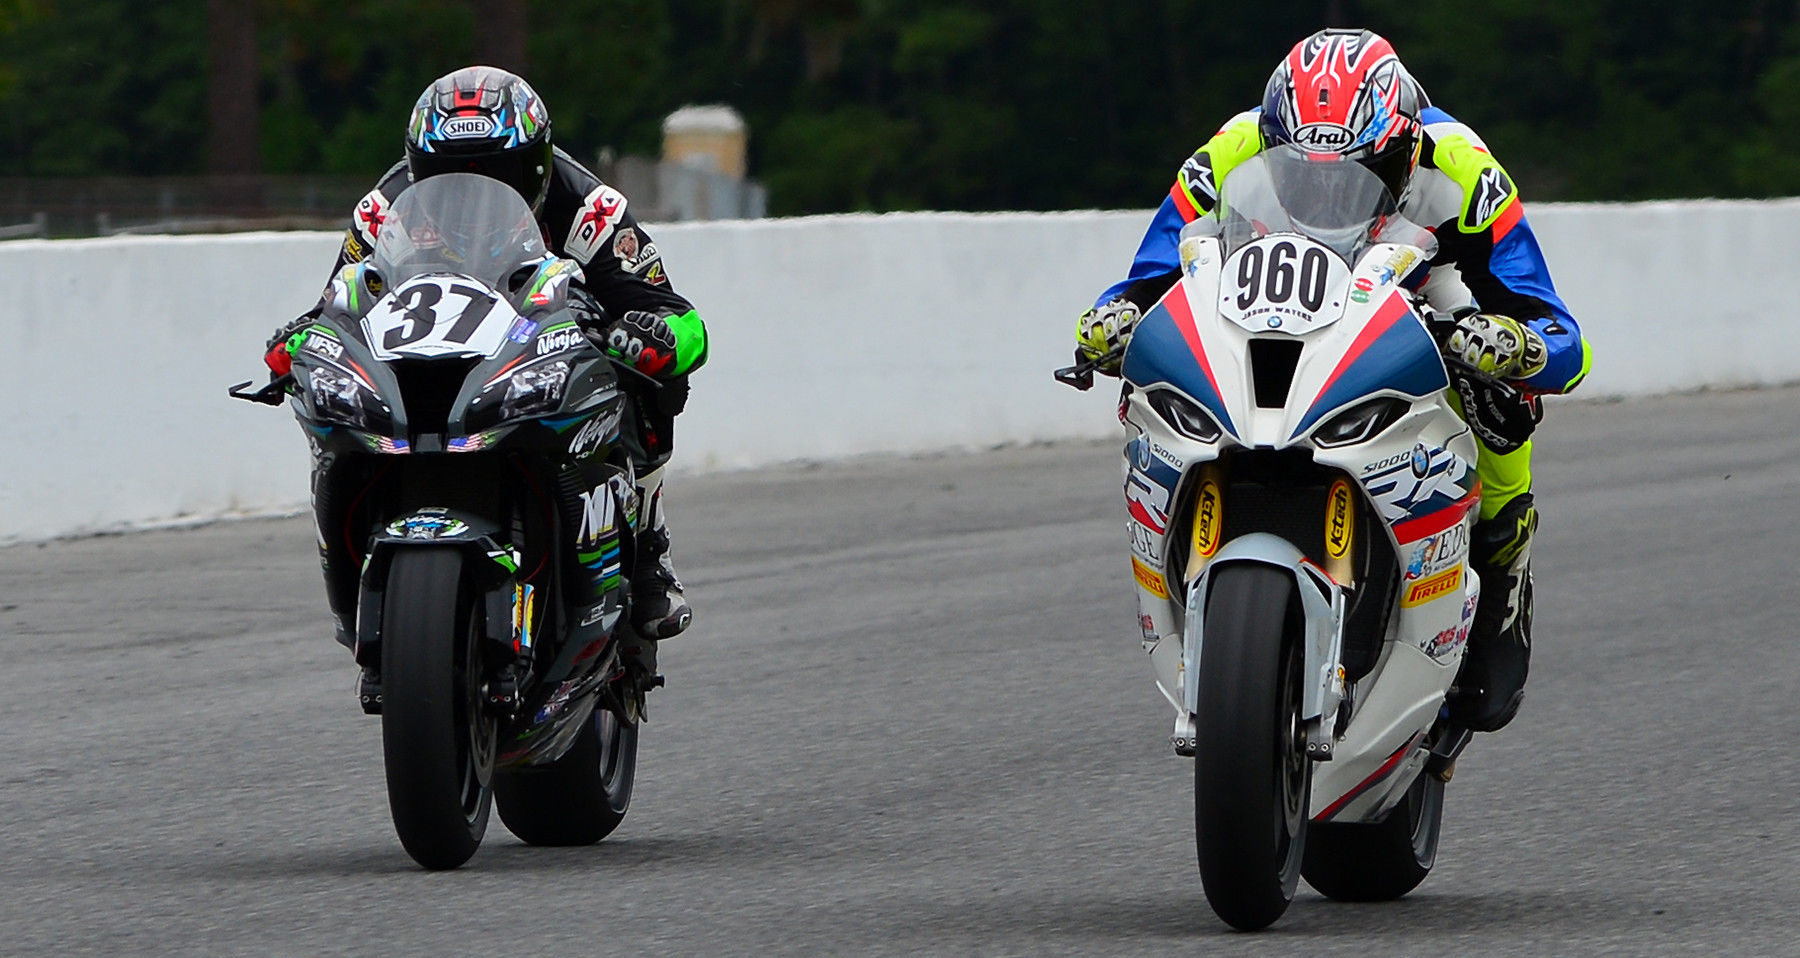 Stefano Mesa (37) and Jason Waters (960) battle for the lead in a race at Roebling Road Raceway, in Georgia. Photo by Lisa Theobald, courtesy ASRA/CCS.